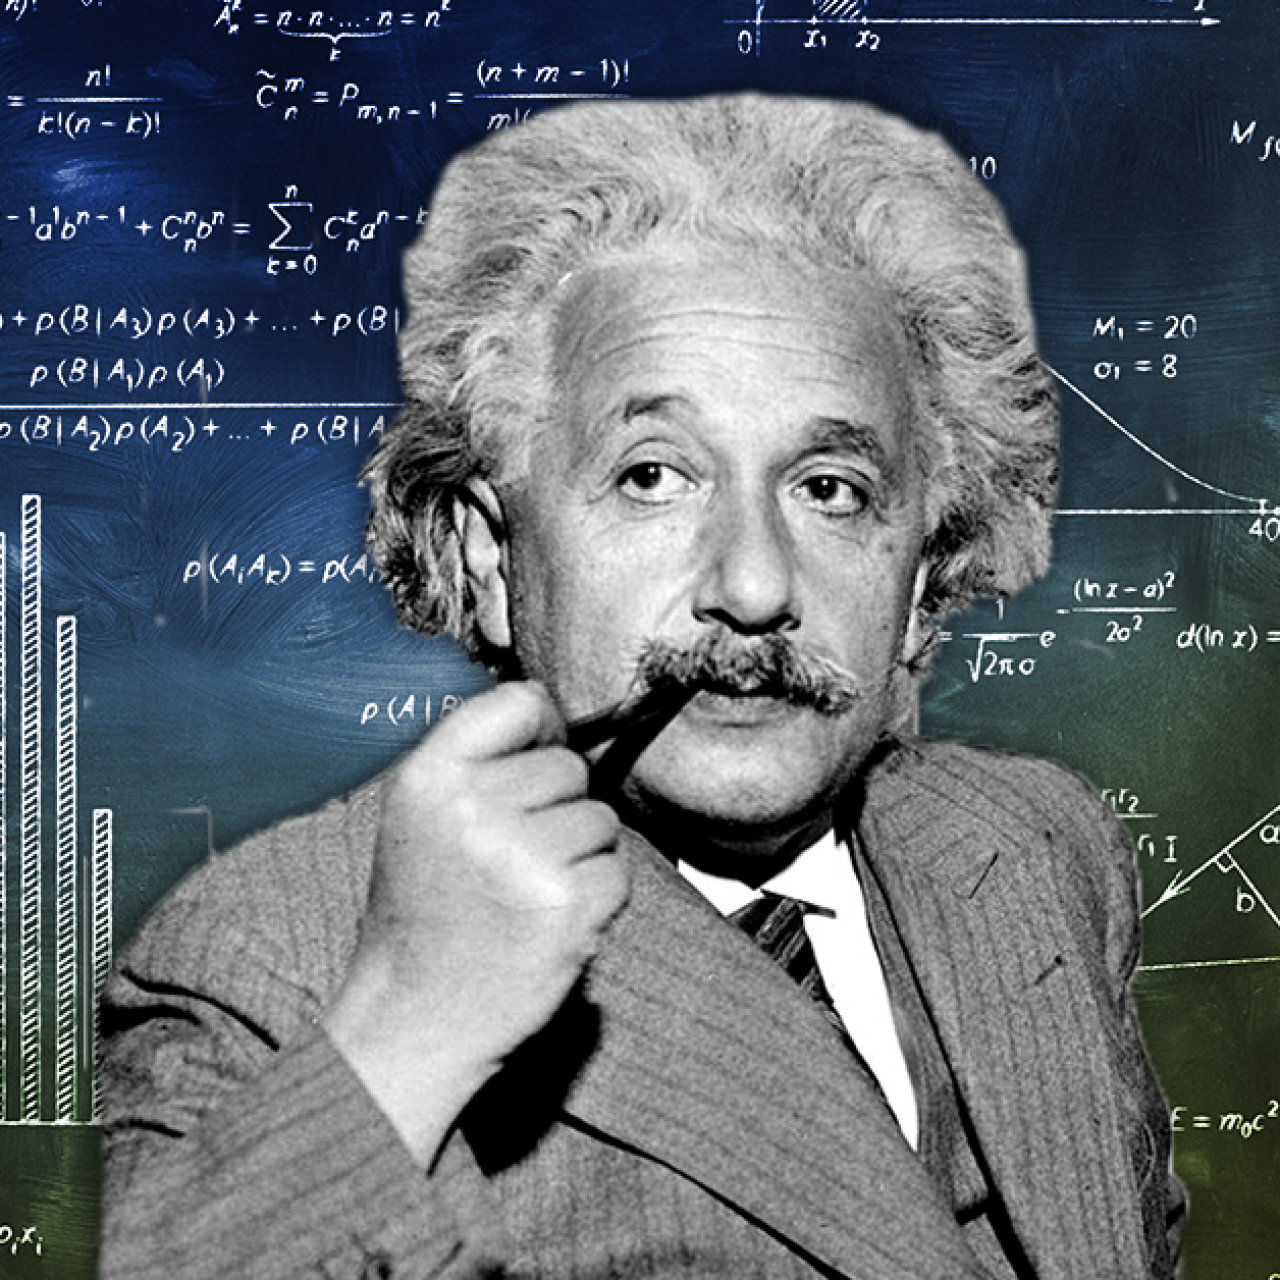 10 Learning Lessons From Albert Einstein